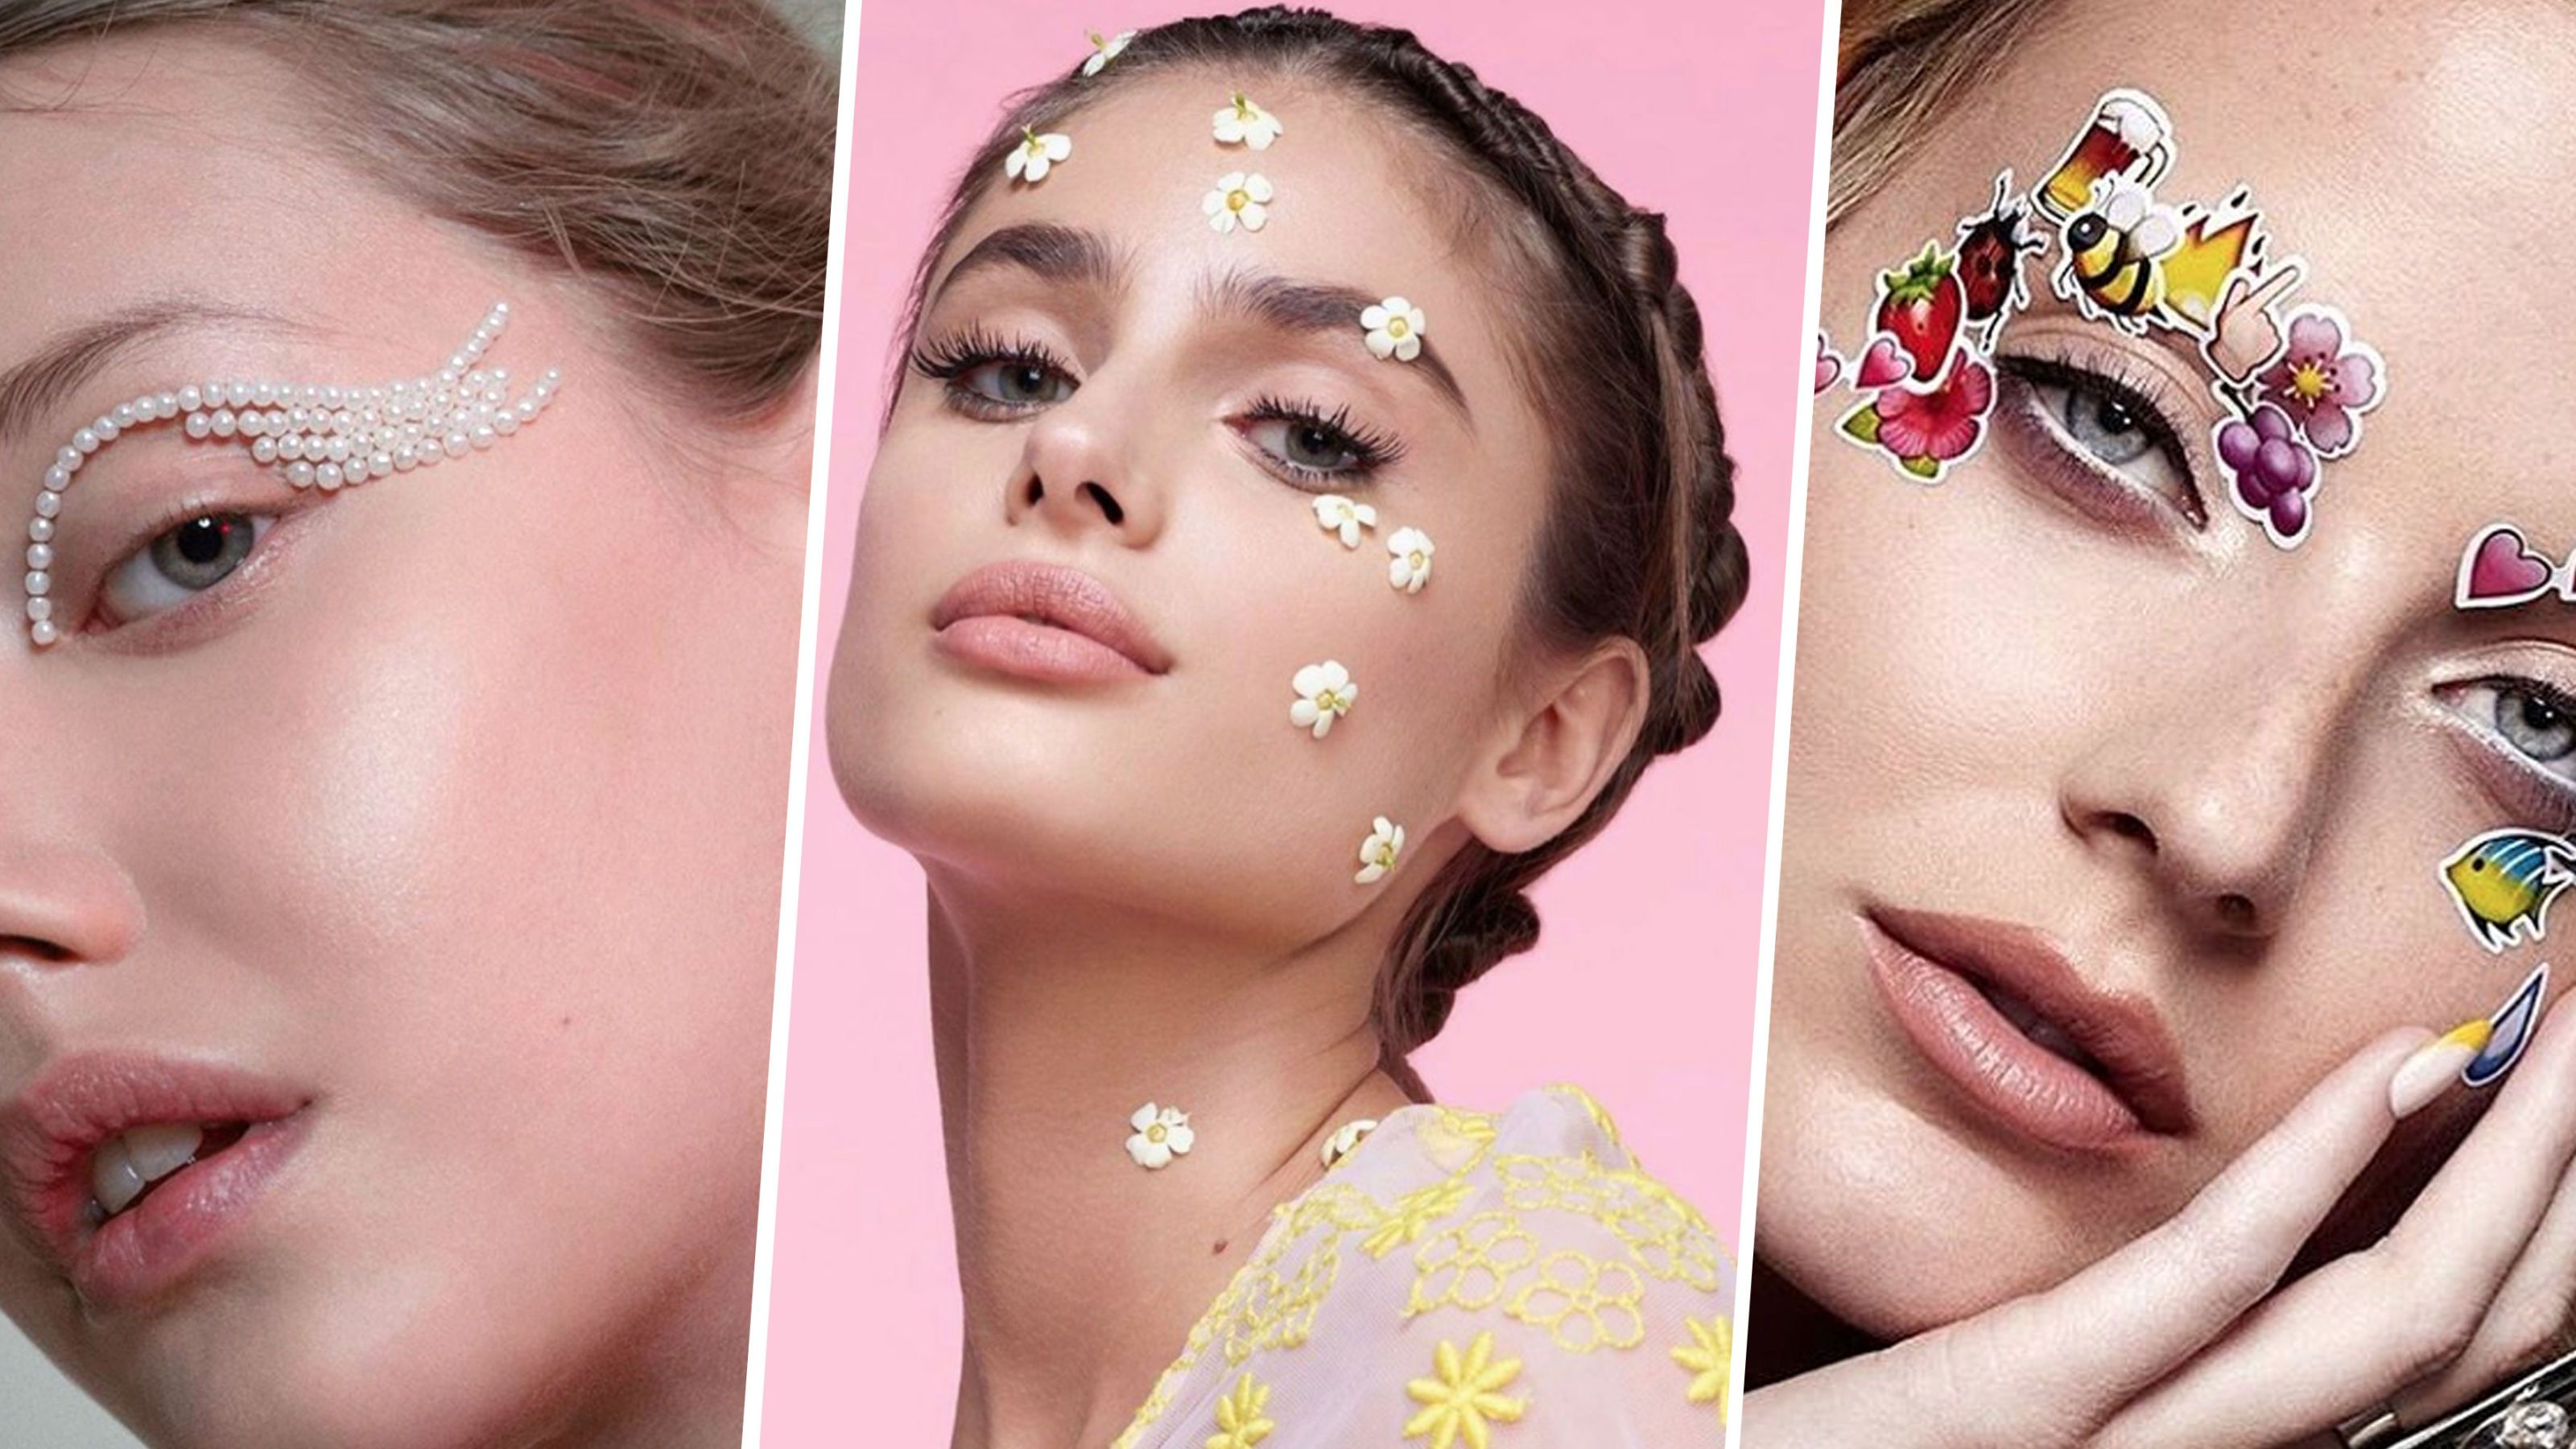 Stickers on Face Beauty Trend - Gluing Things on Face Makeup